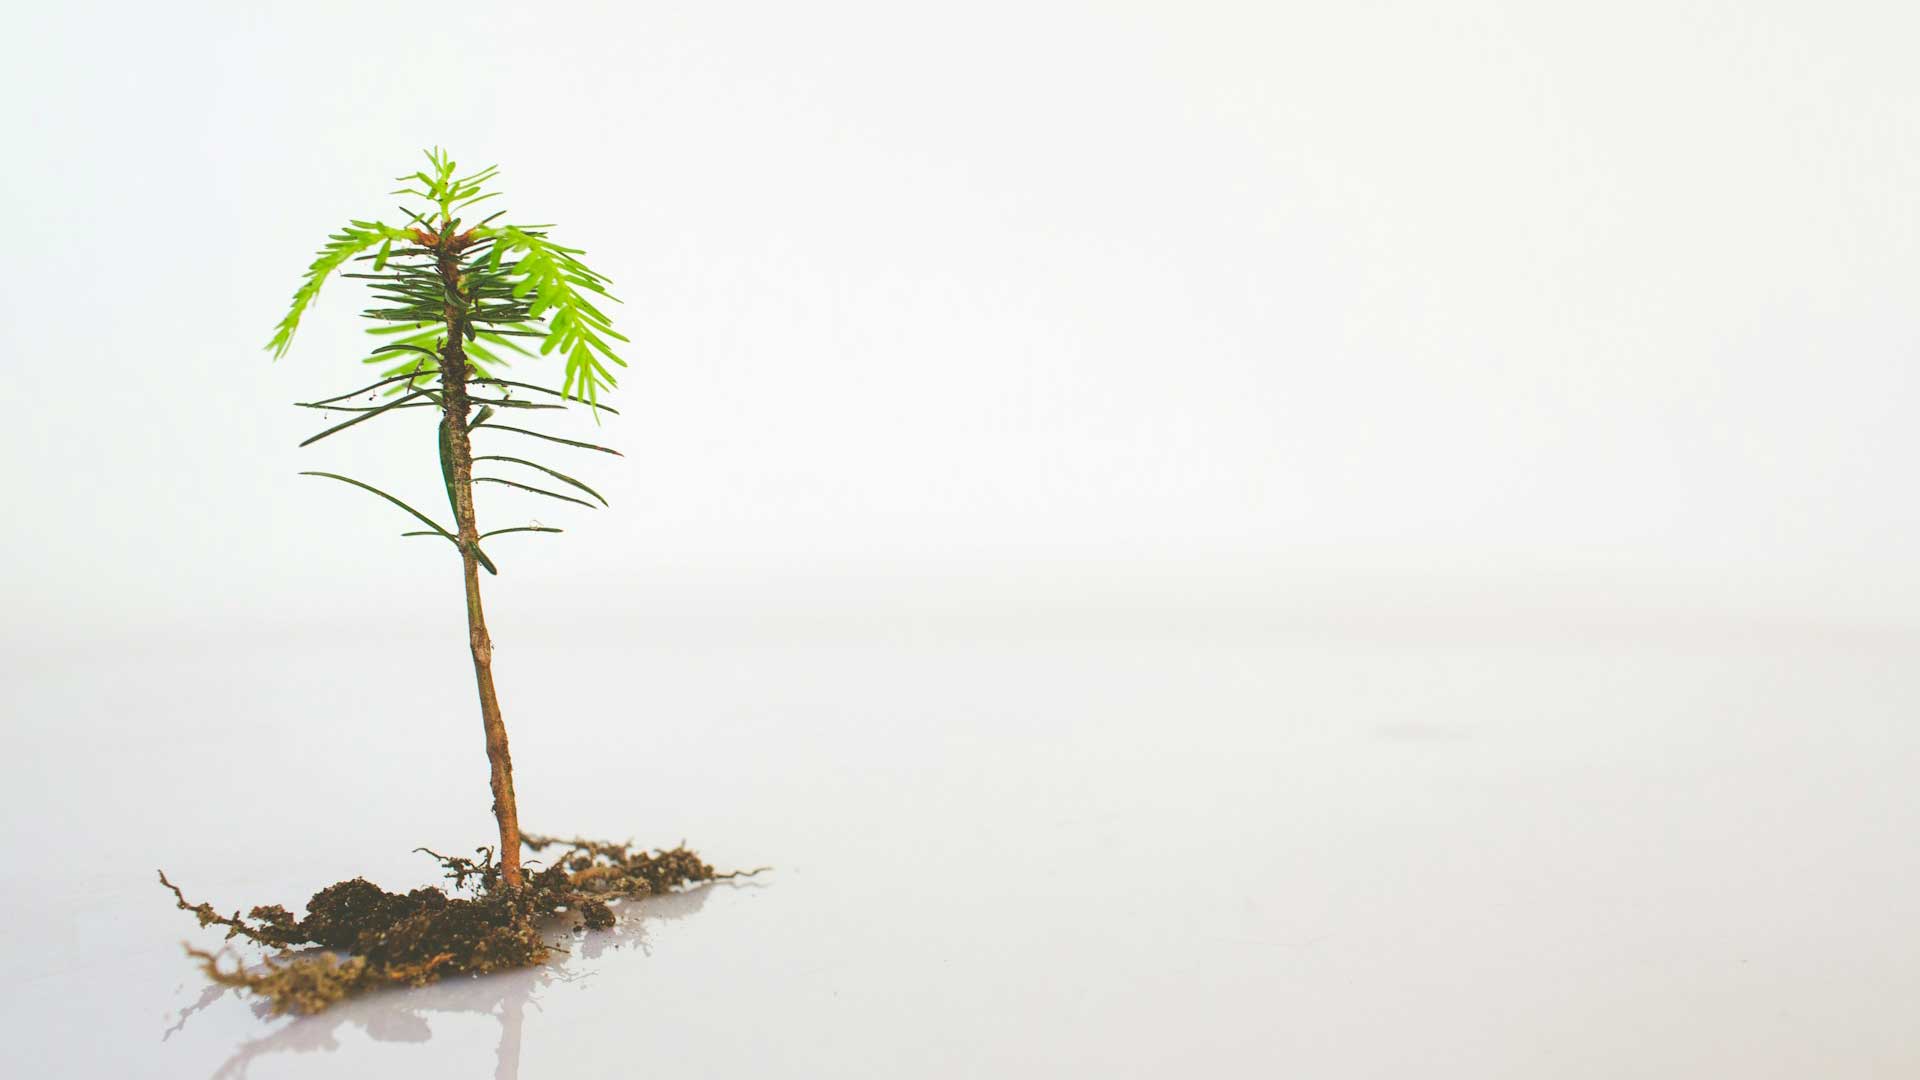 A small tree showing career growth.